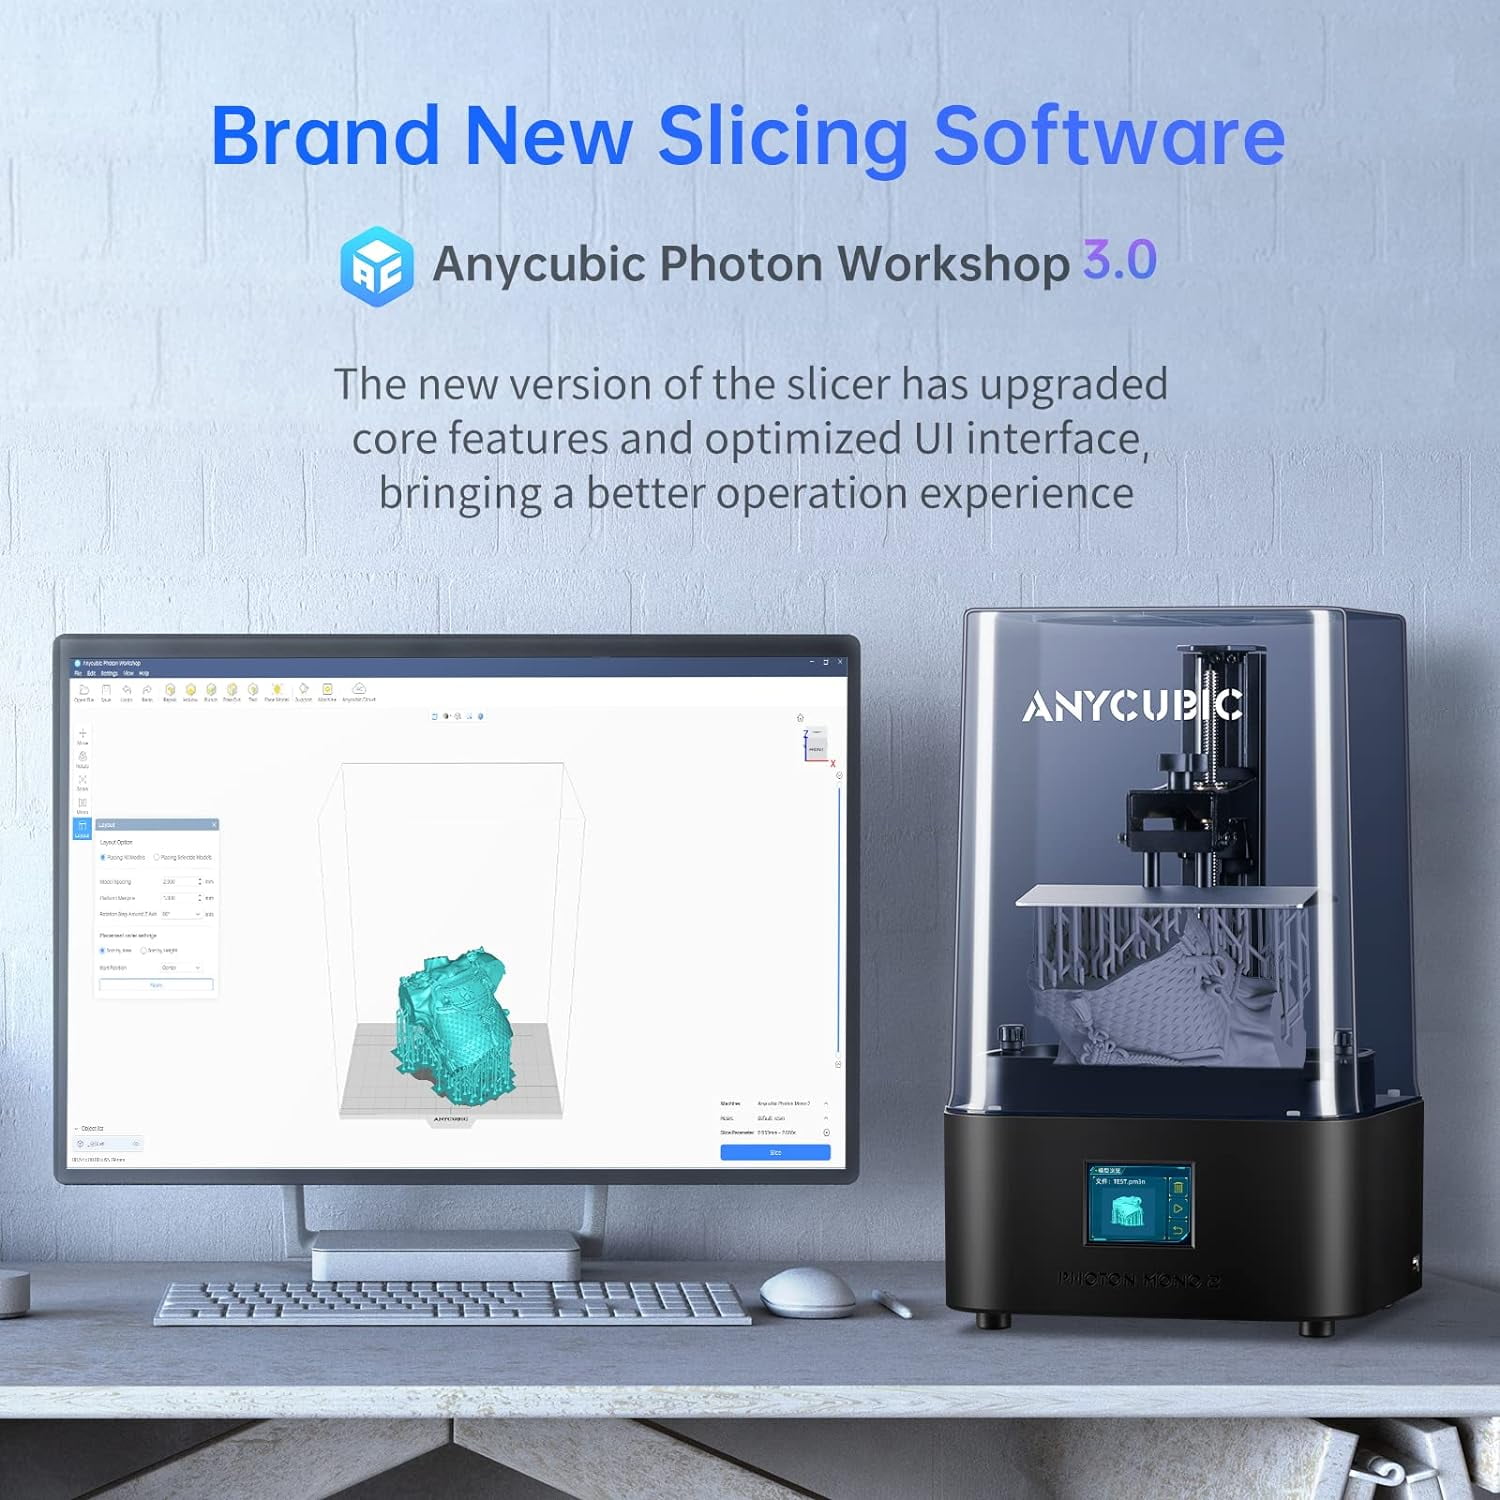 ANYCUBIC Photon D2 resin 3D printer now $234 off at new all-time $316 low  (Reg. $550)